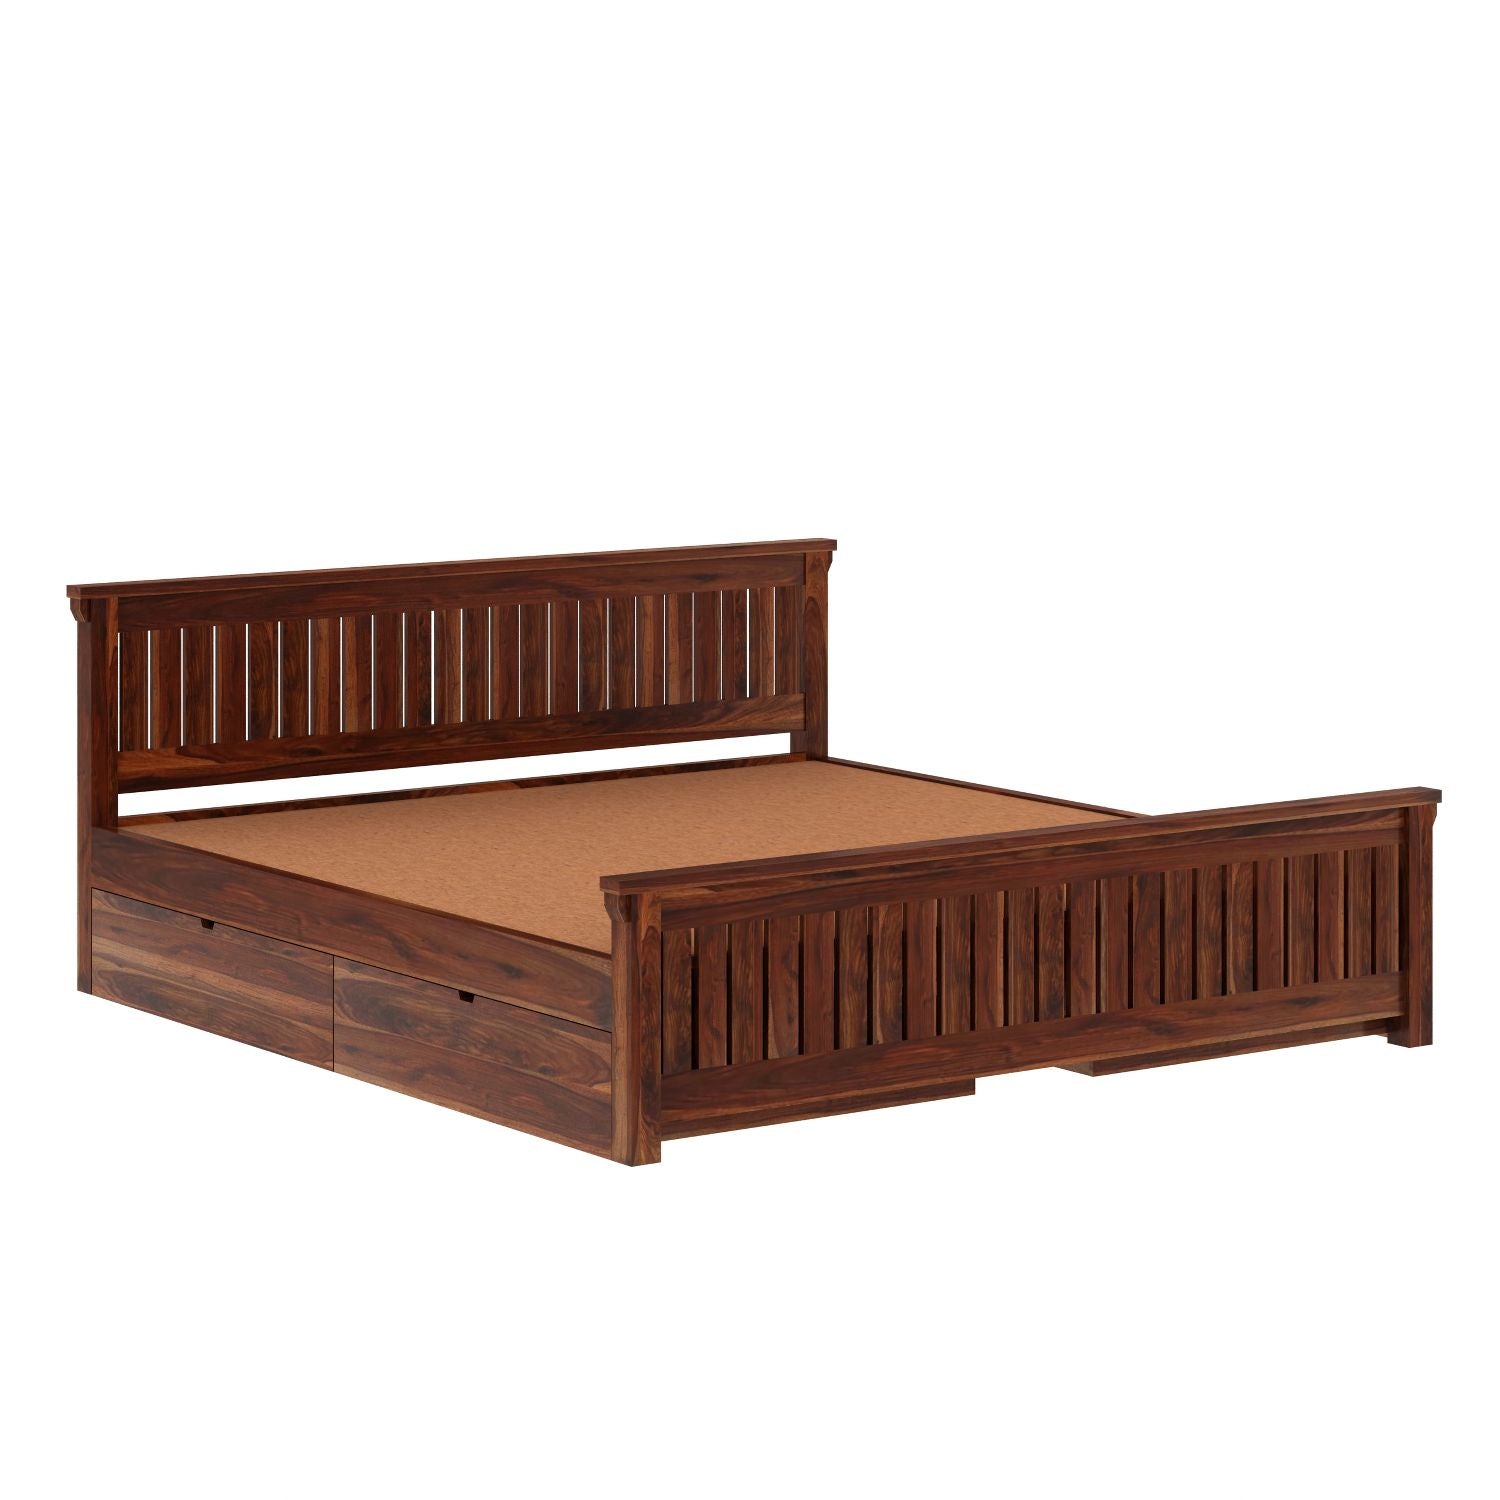 Trinity Solid Sheesham Wood Bed With Four Drawers (Queen Size, Natural Finish)